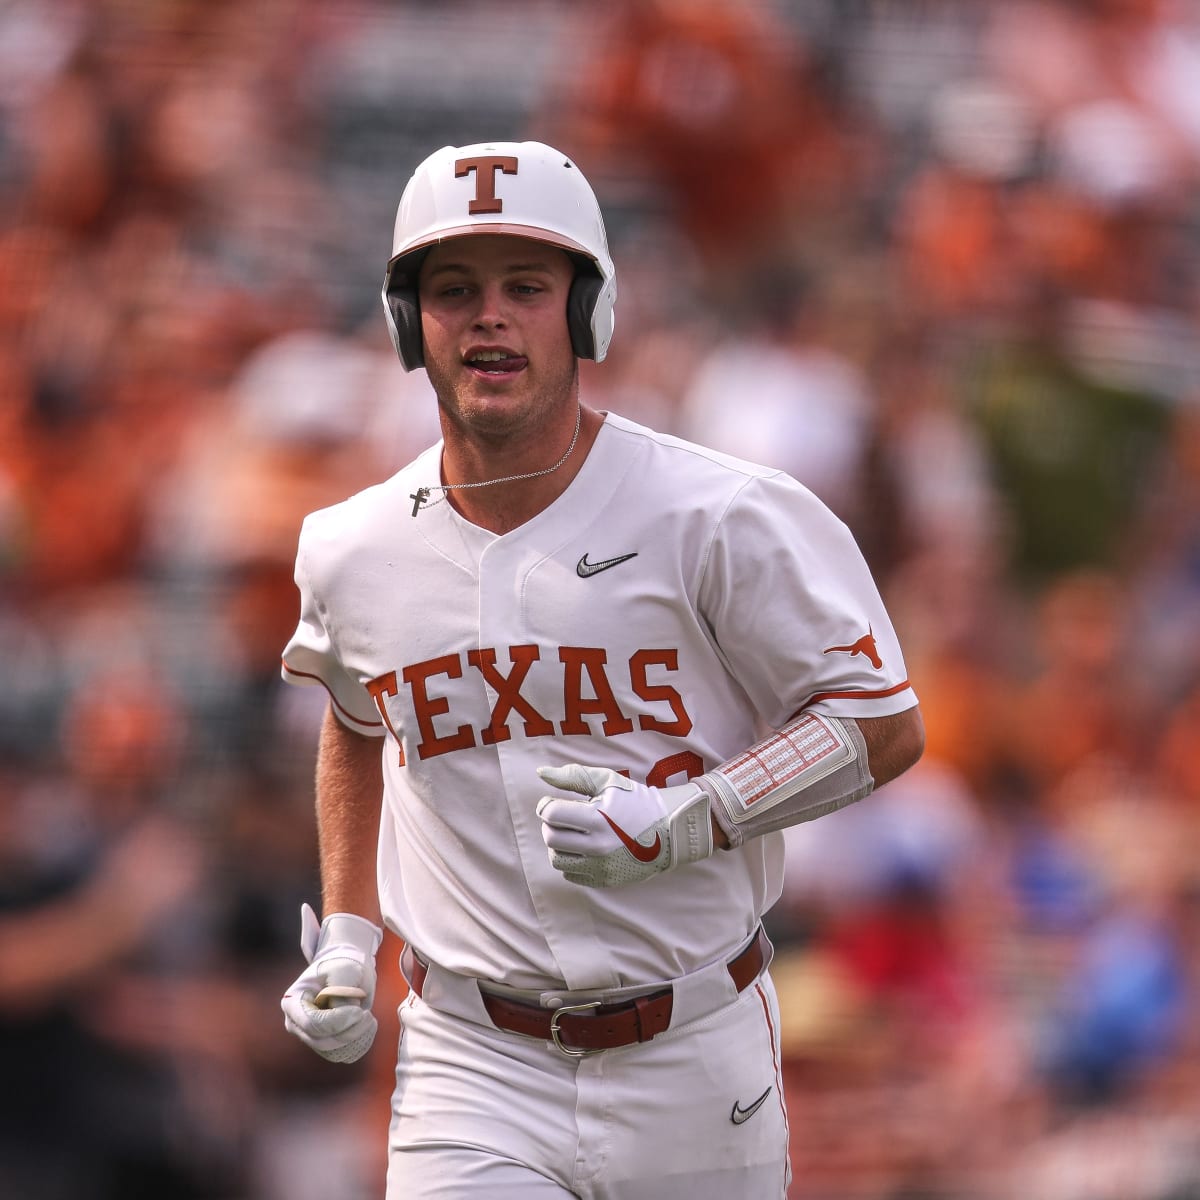 Texas baseball players and fans impressed by Air Force team